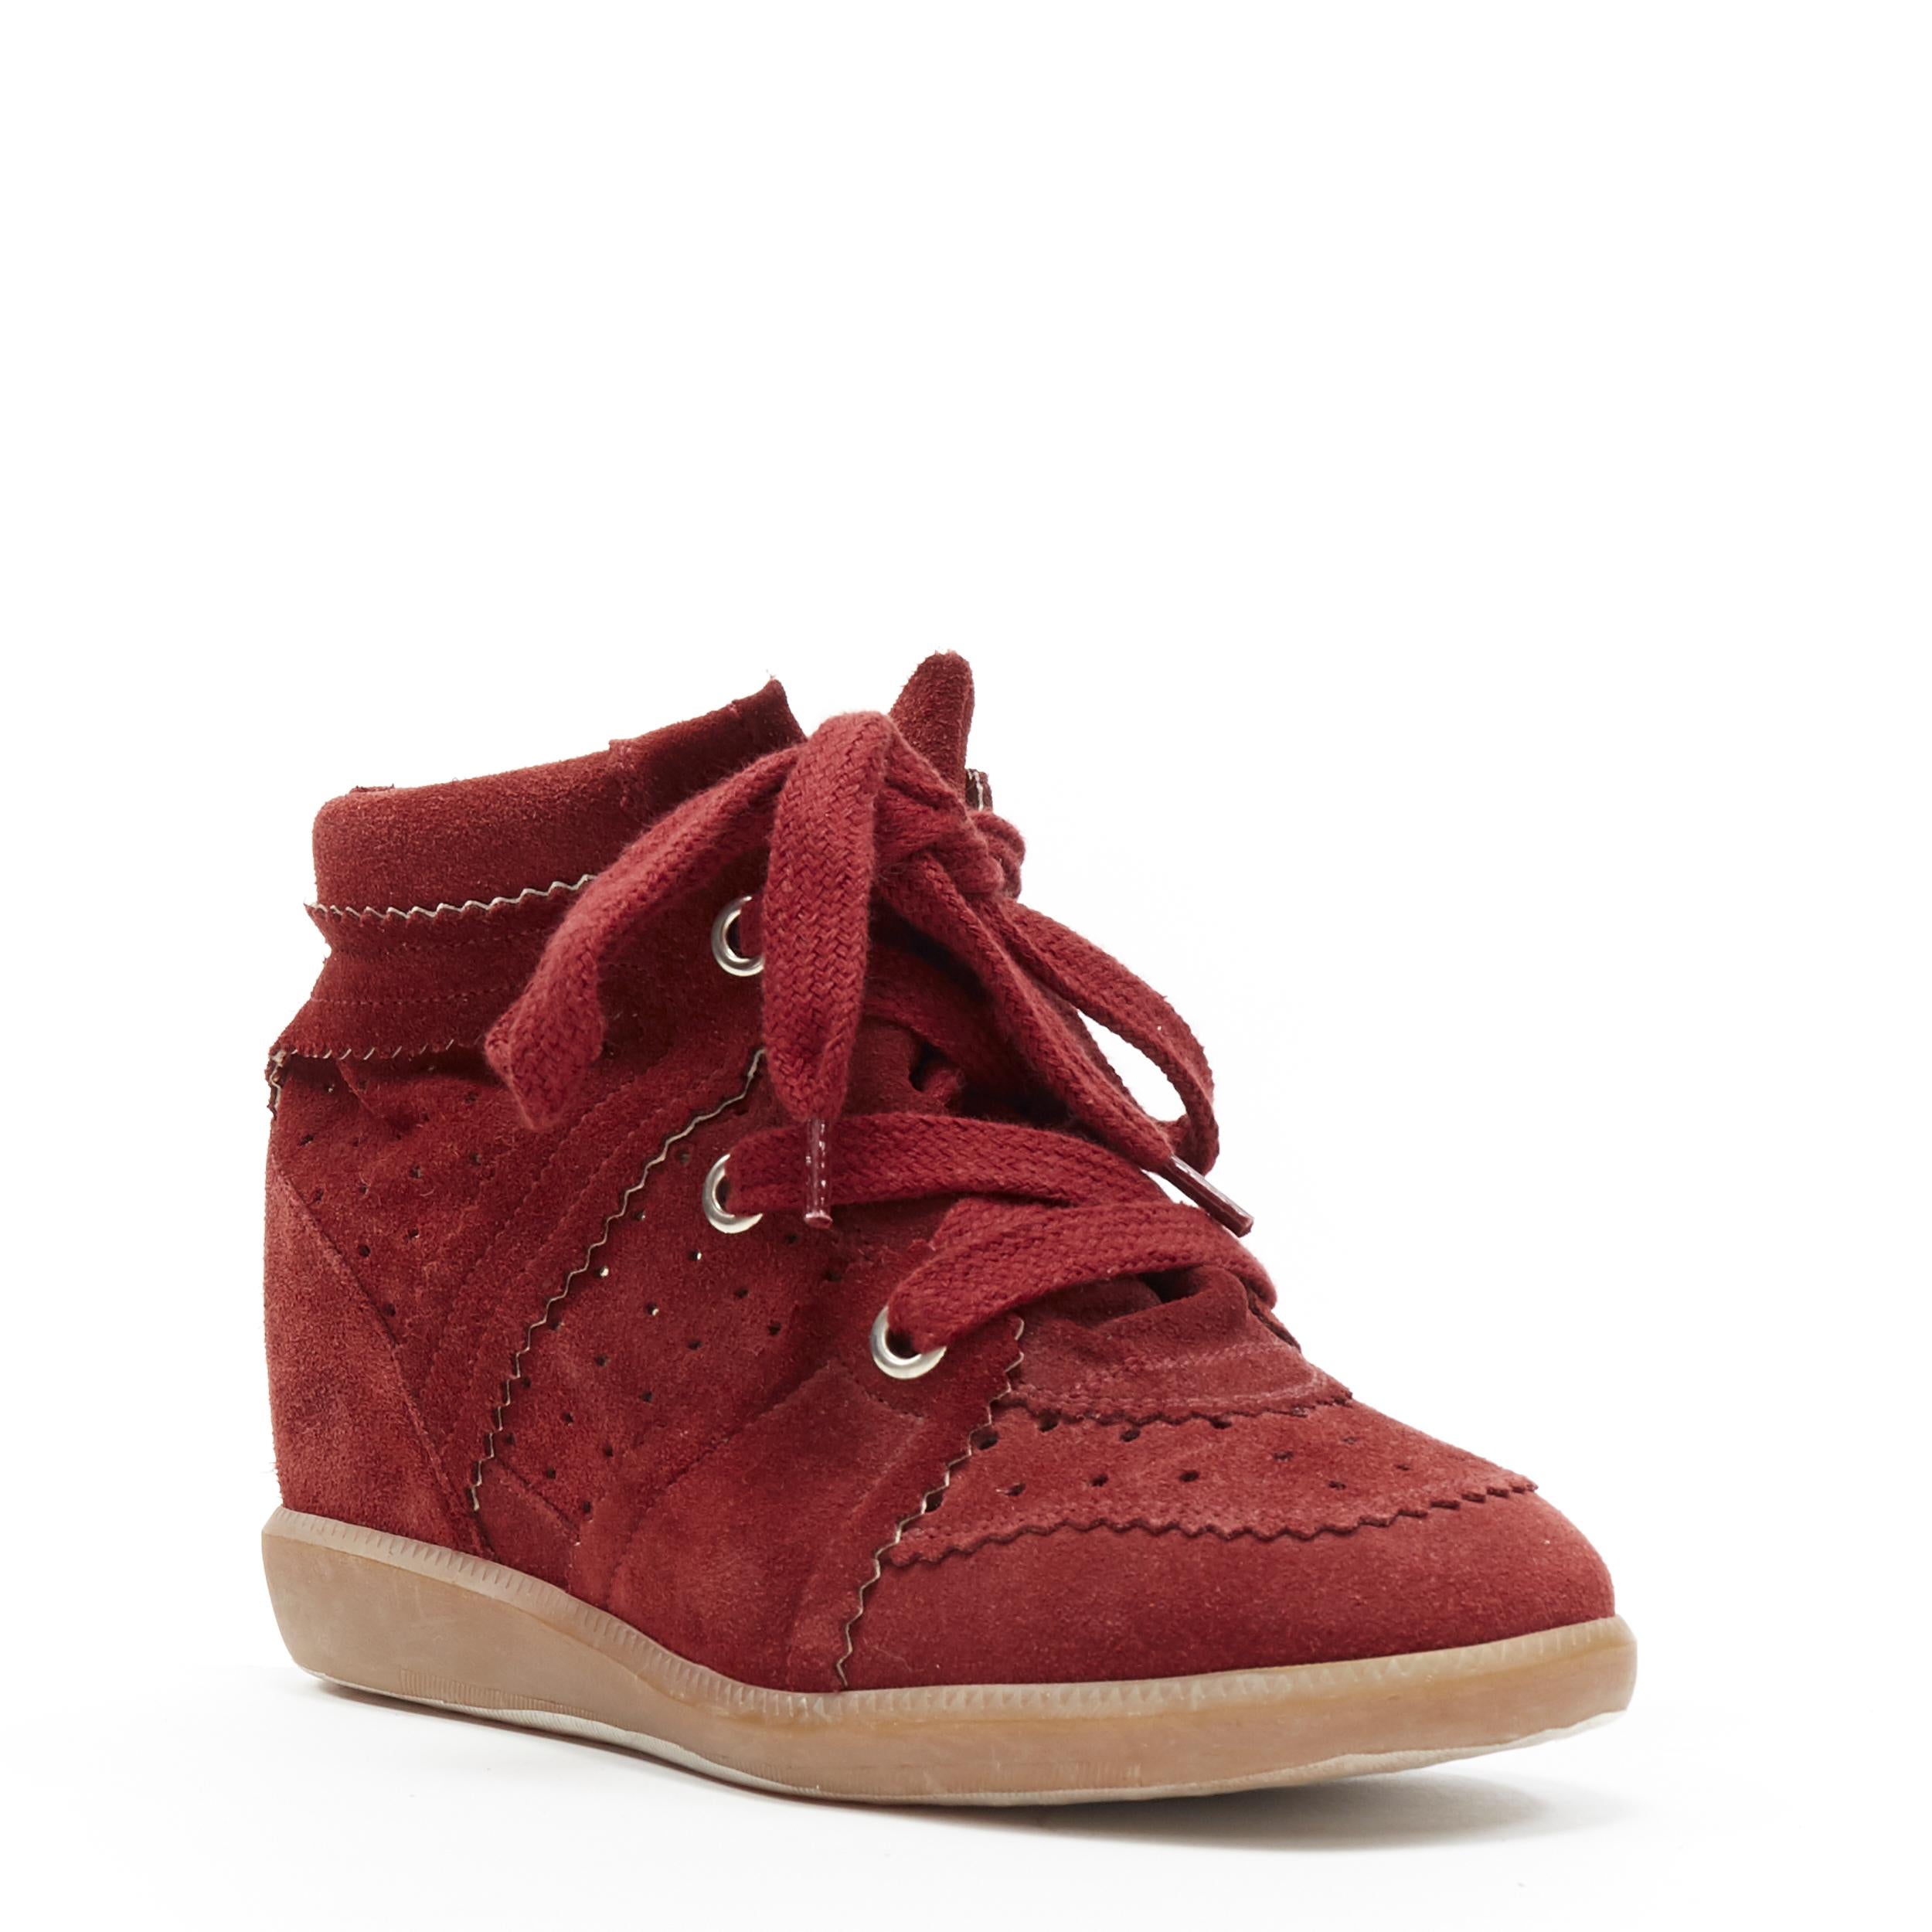 new ISABEL MARANT Bobby Burgundy suede lace up concealed wedge sneaker EU37
Brand: Isabel Marant Etoile
Designer: Isabel Marant
Model Name / Style: Bobby
Material: Suede
Color: Burgundy
Pattern: Solid
Closure: Lace up
Lining material: Leather
Extra